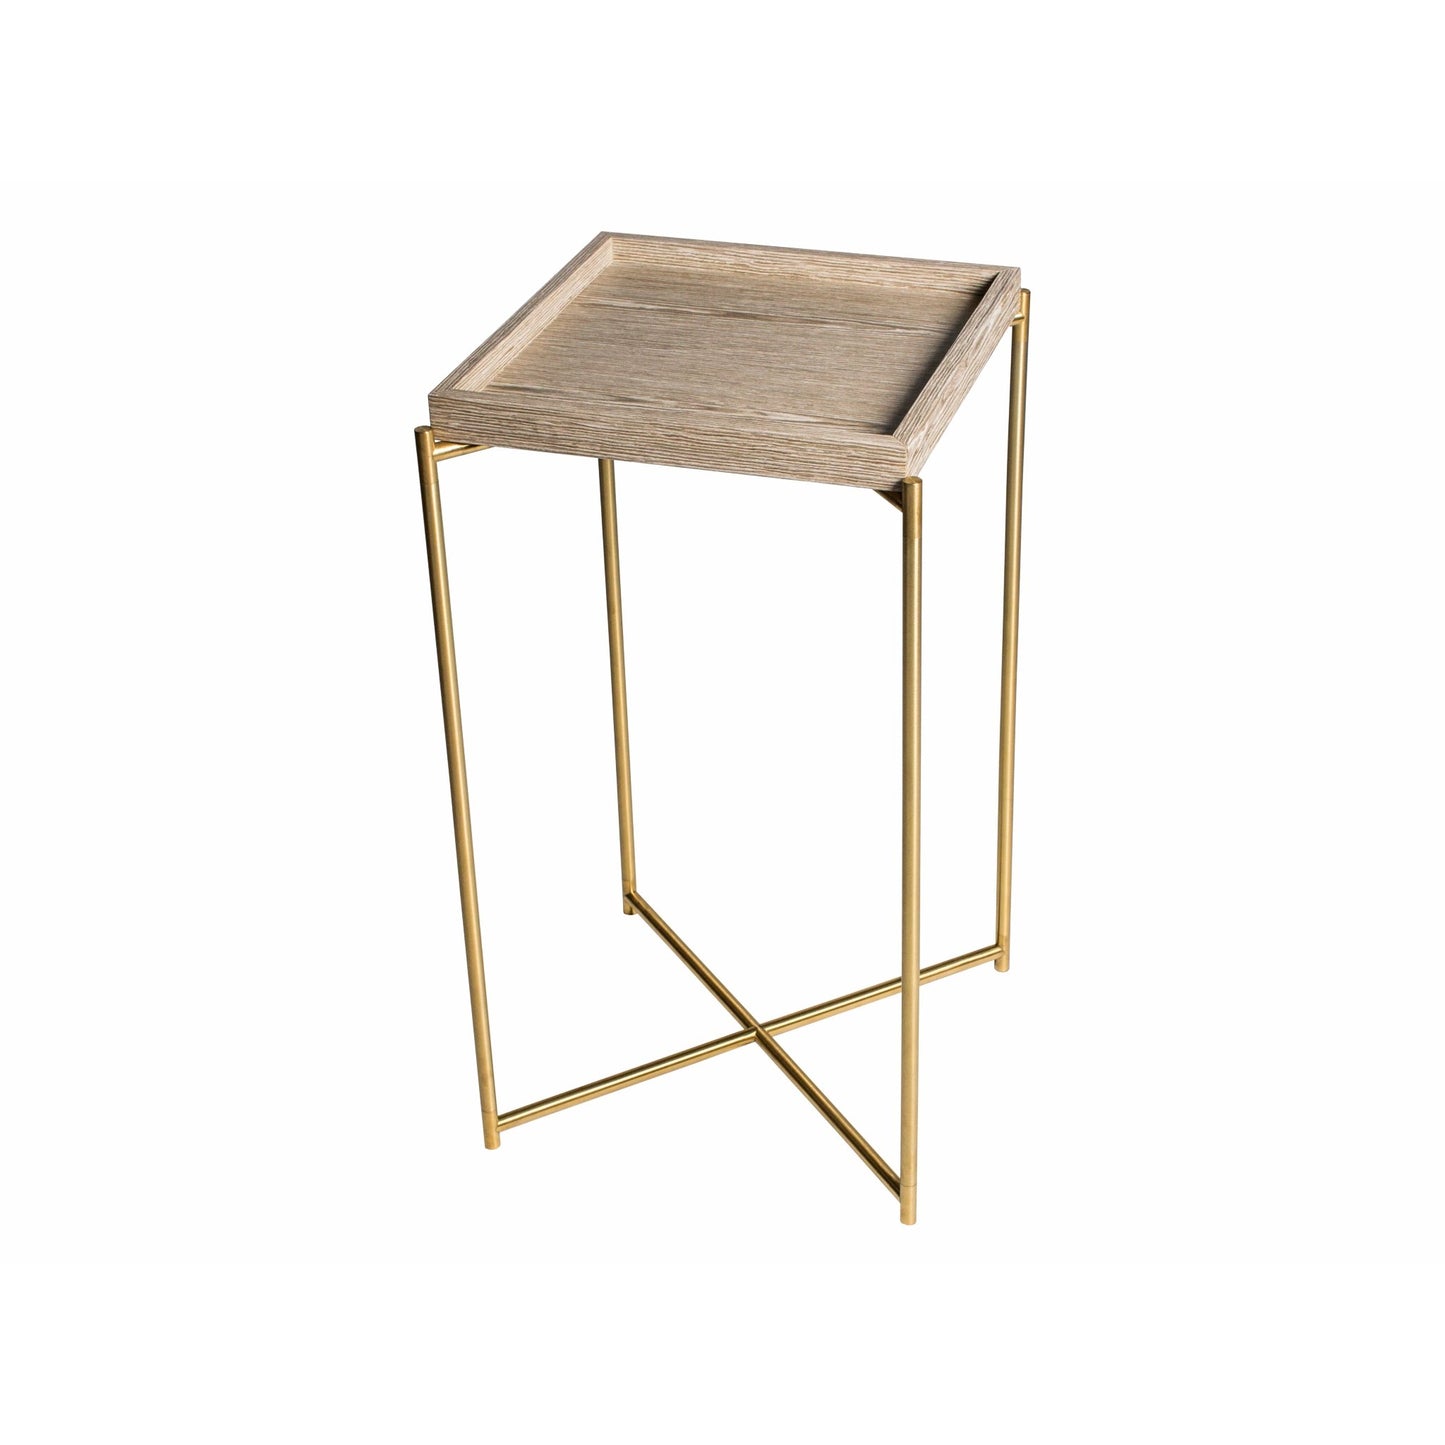 Iris Square Tray Top Plant Stand - Weathered Oak Tray & Brass Frame